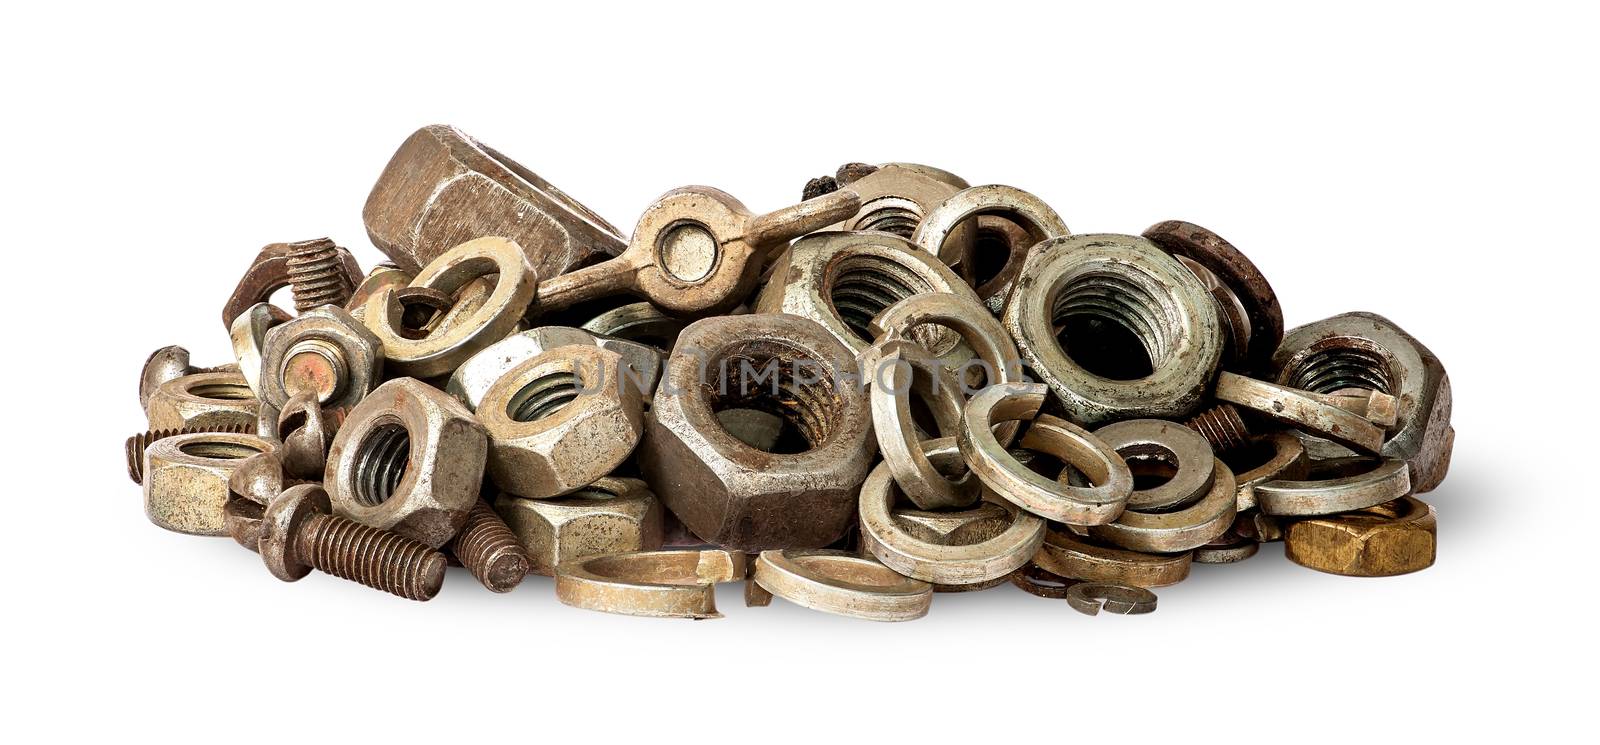 Pile of old fasteners isolated on white background